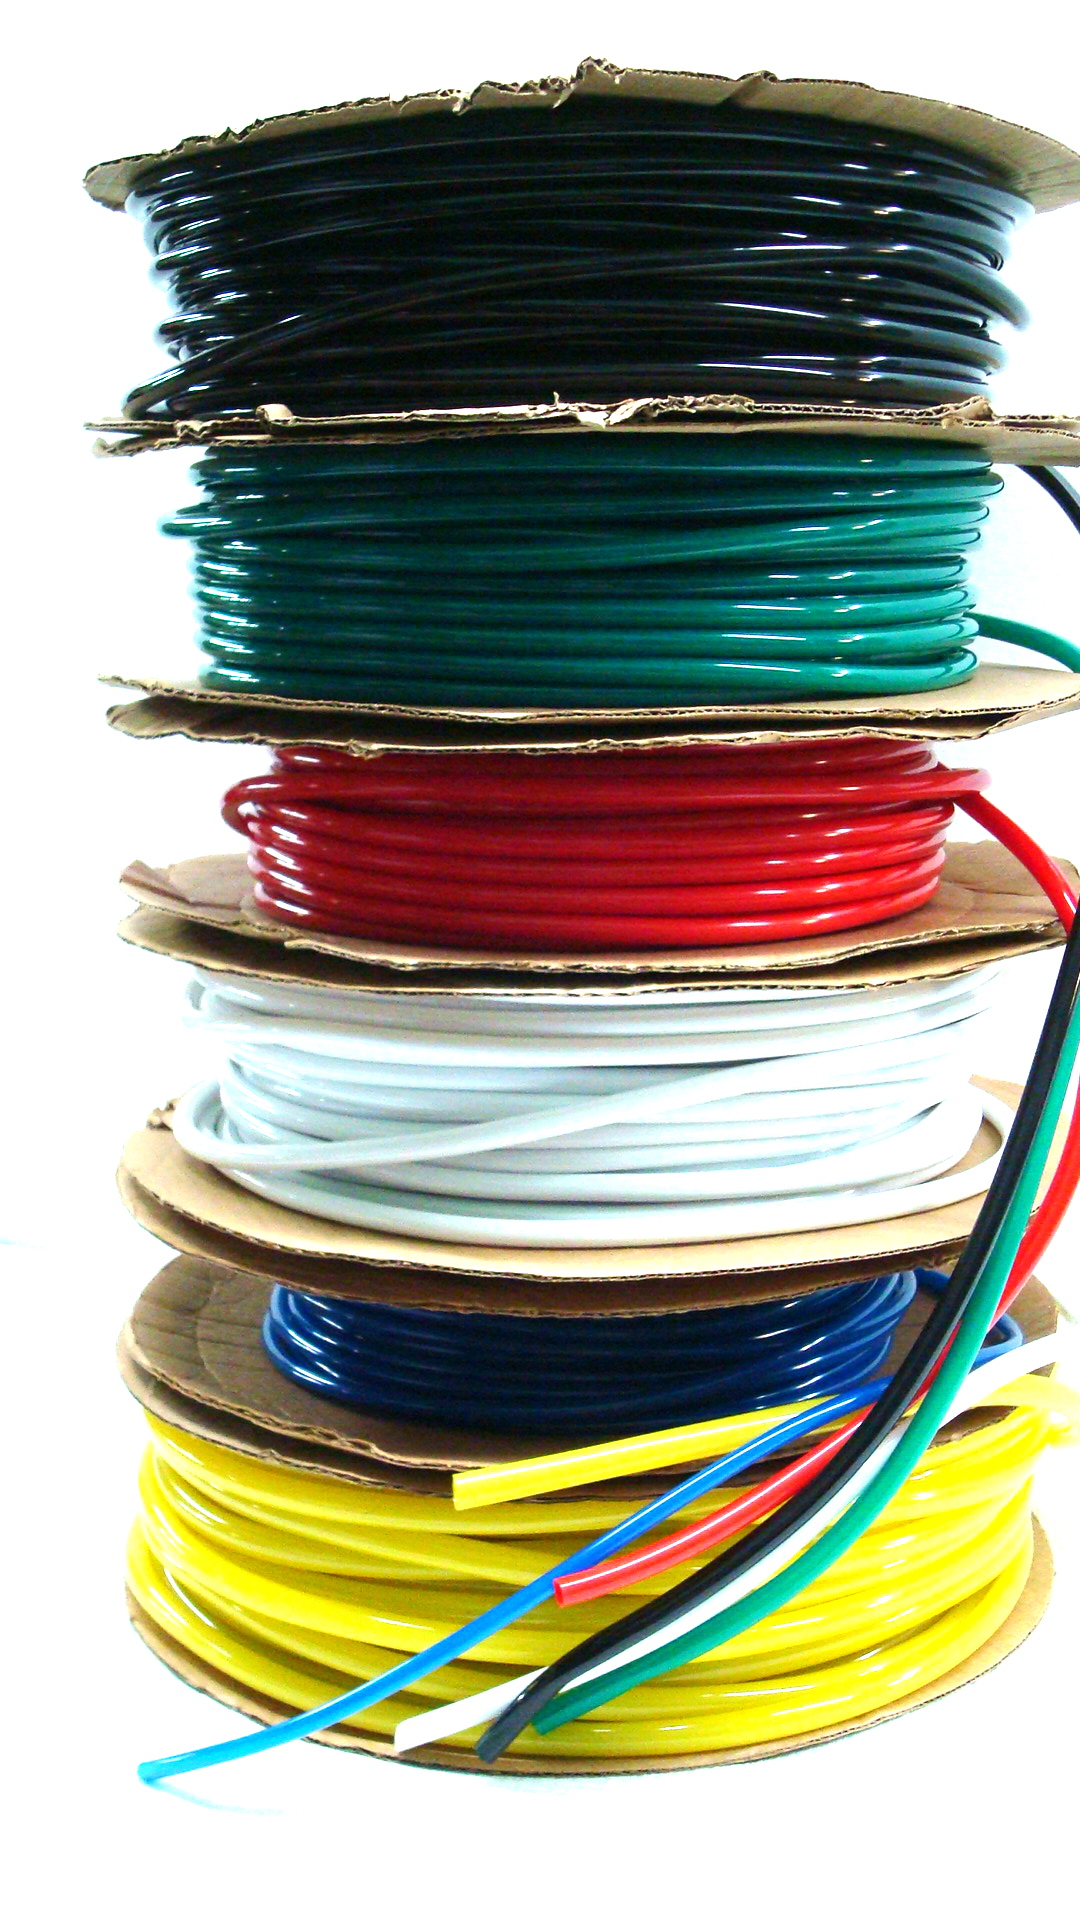 Colored Vinyl Tubing (PVC) - Canal Rubber Flexible Plastic Tubing For Crafts